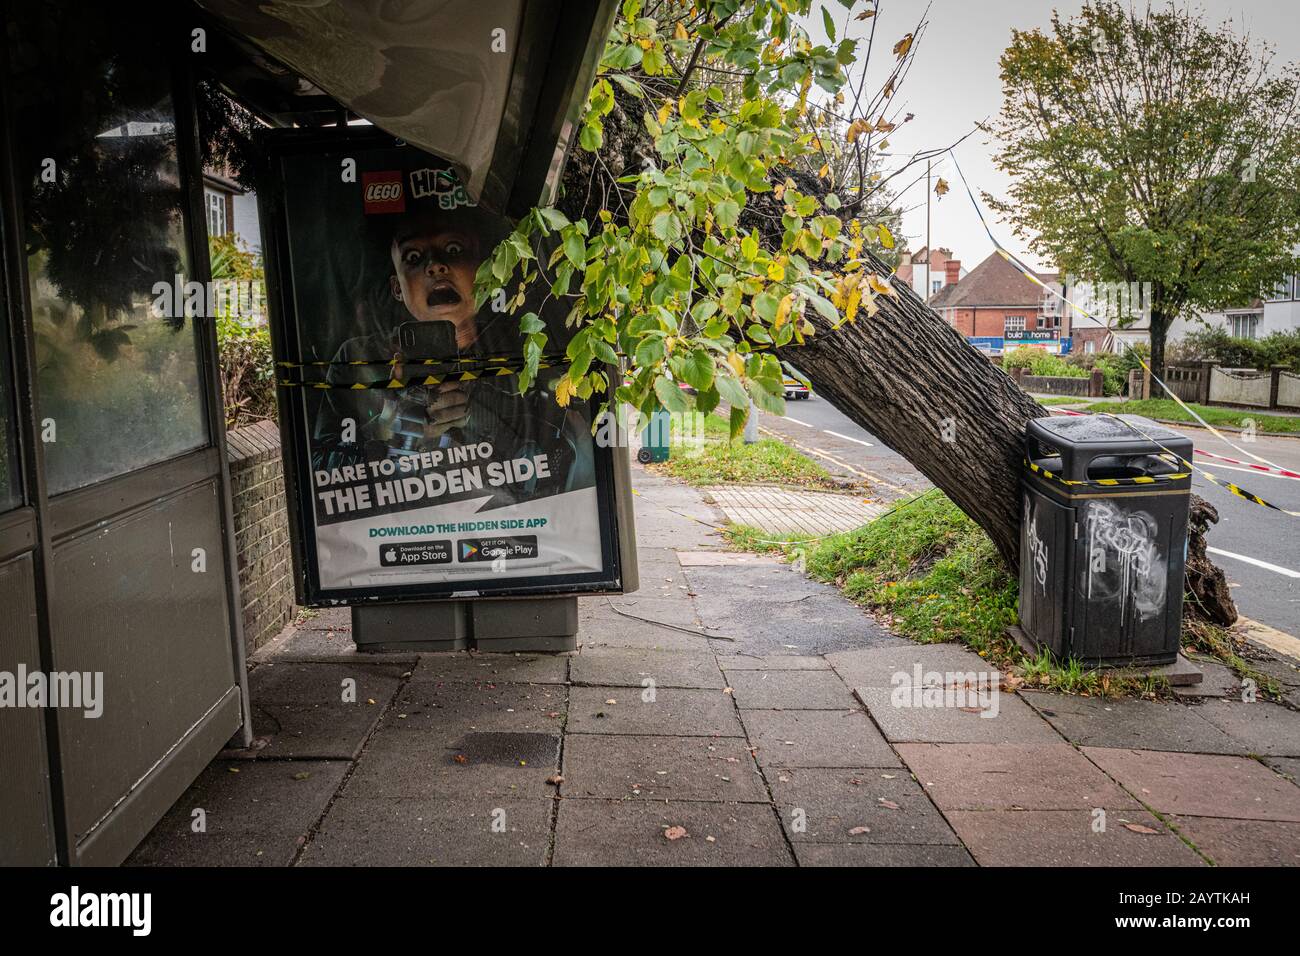 A tree toppled onto a damaged bus stop dues to high winds, Brighton, East Sussex UK Stock Photo